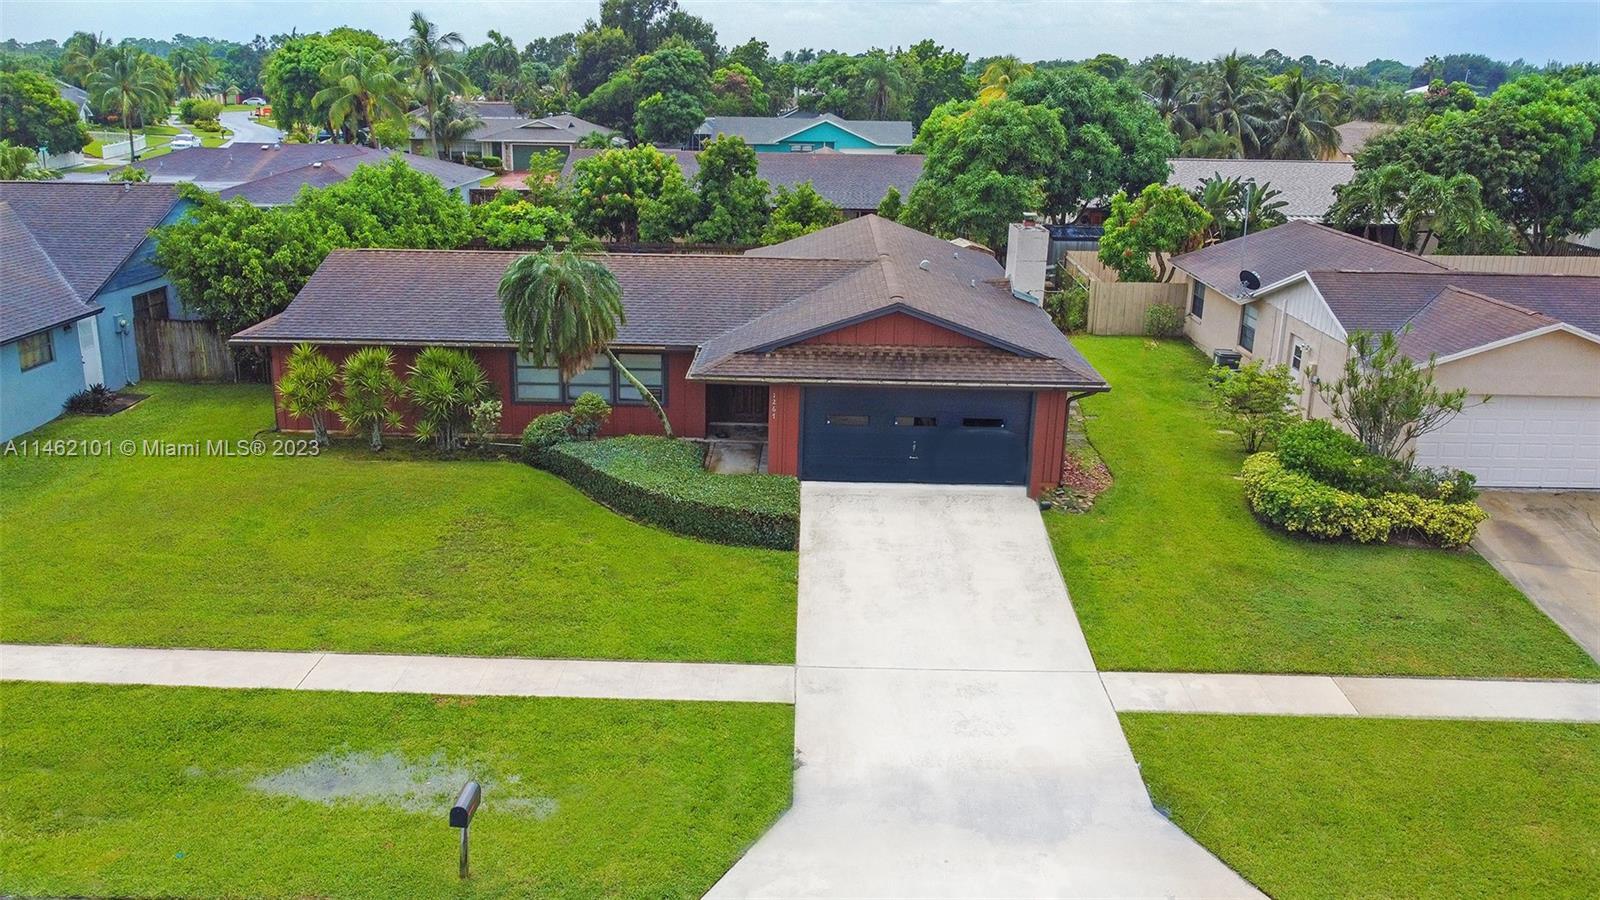 Welcome to your West Palm Beach paradise! This 3-bedroom, 2-bathroom gem features a fully renovated 